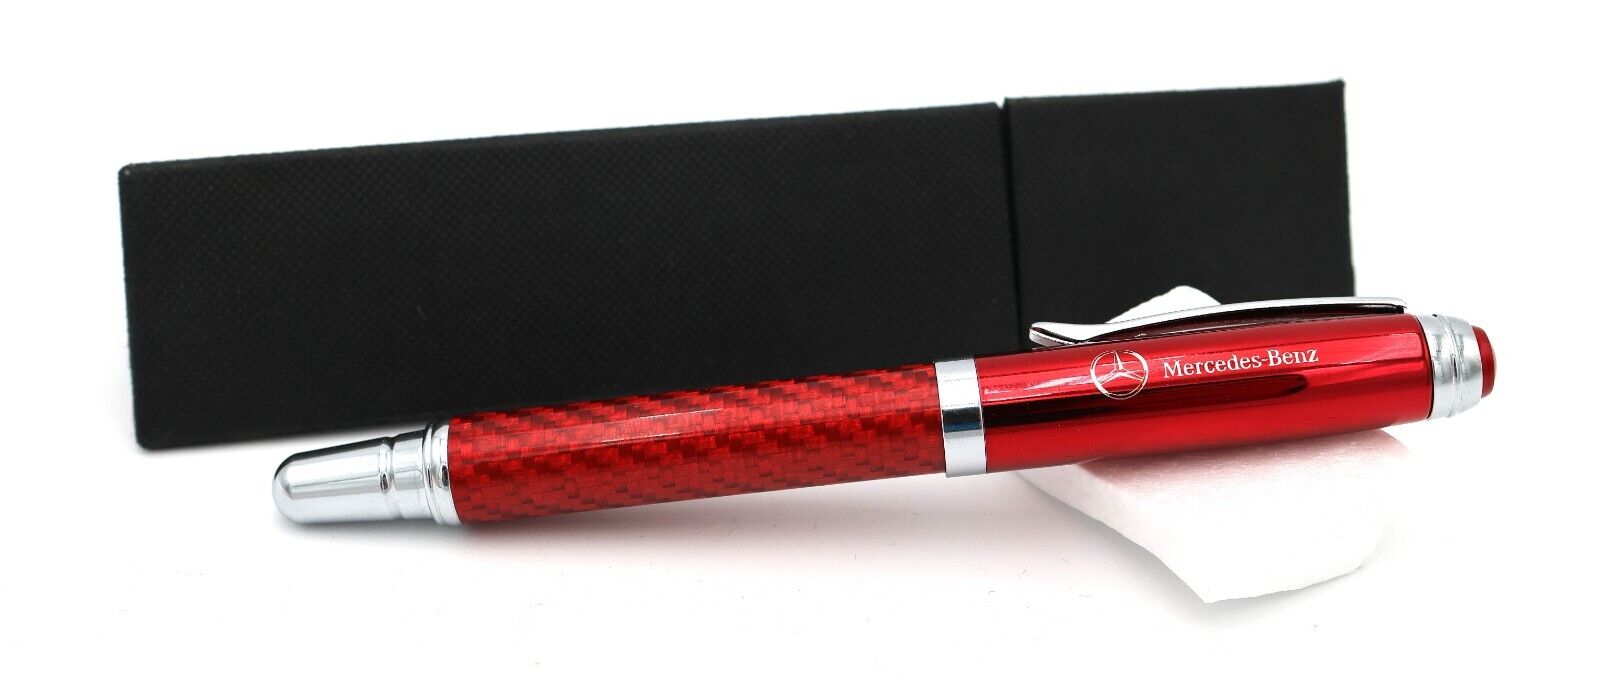 Mercedes Benz Ballpoint Pen Carbon Fiber Red and Chrome With Case